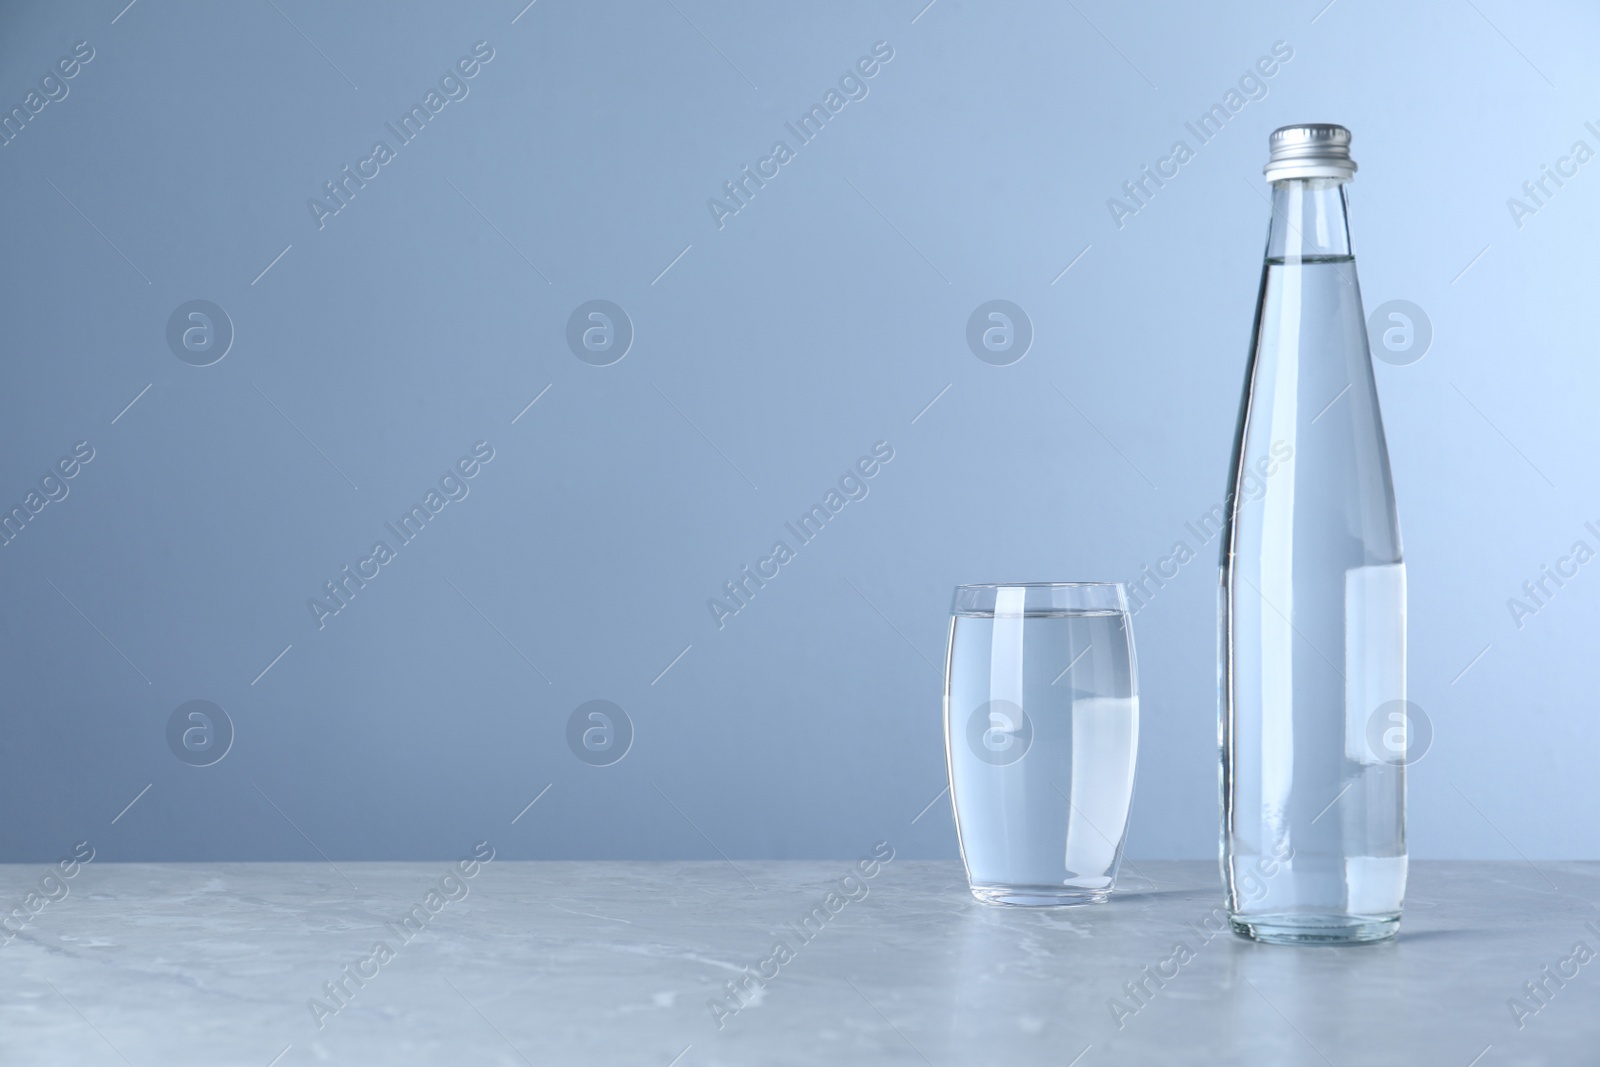 Photo of Glass and bottle with water on table against light blue background, space for text